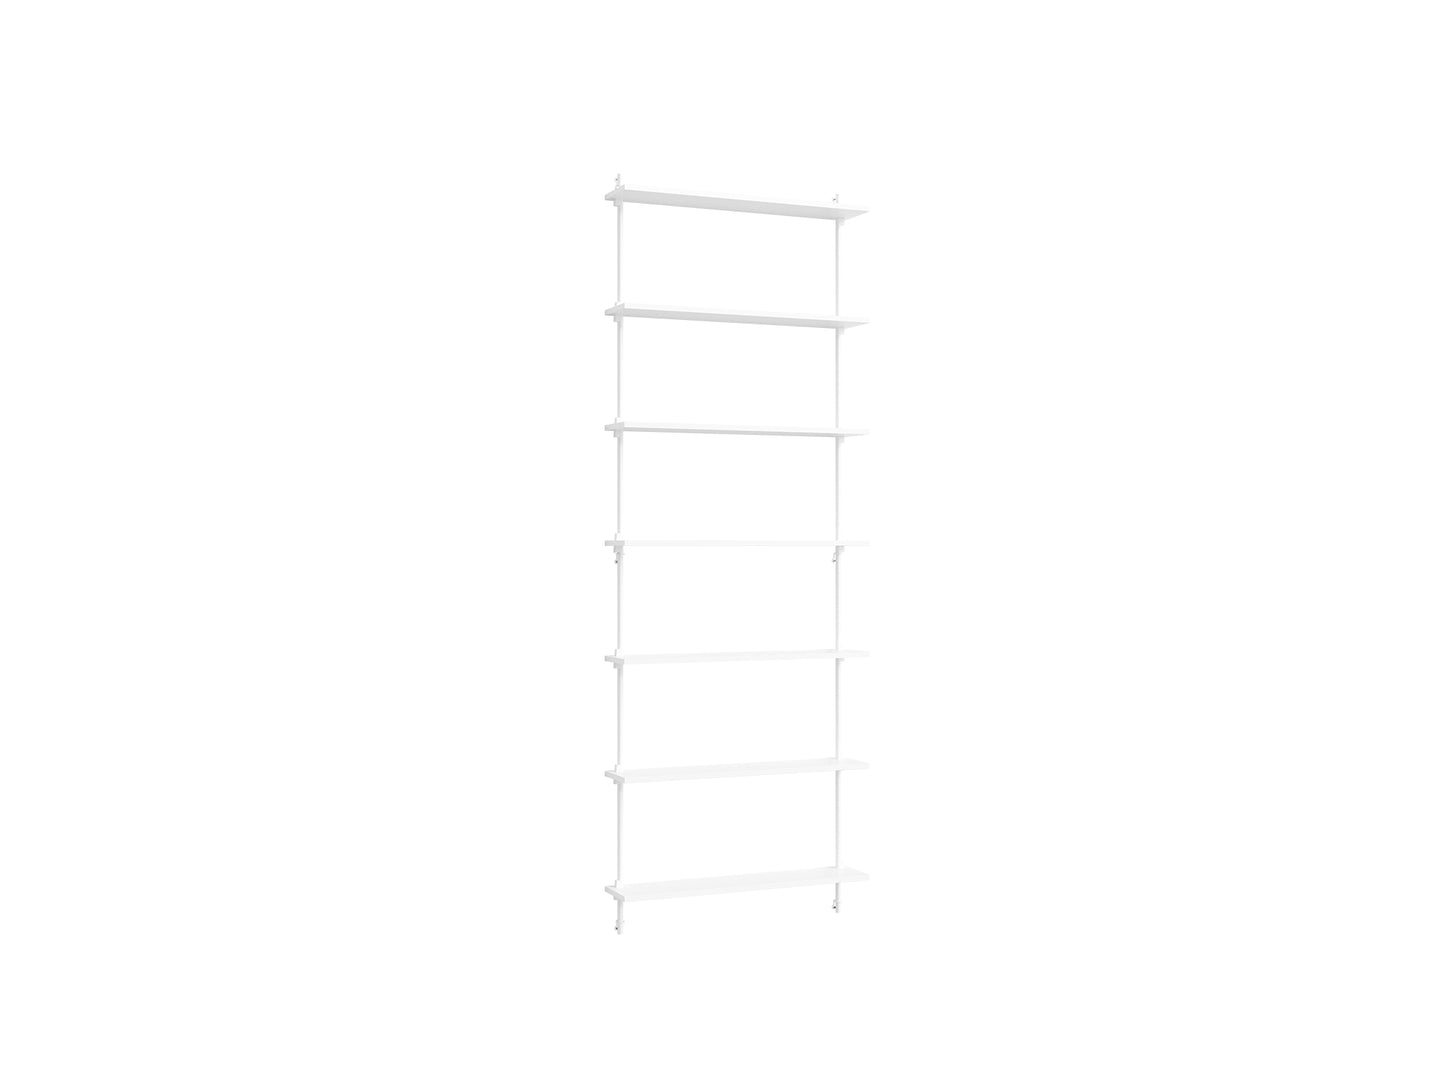 Wall Shelving System Sets (230 cm) by Moebe - WS.230.1 / White Uprights / White Painted Oak